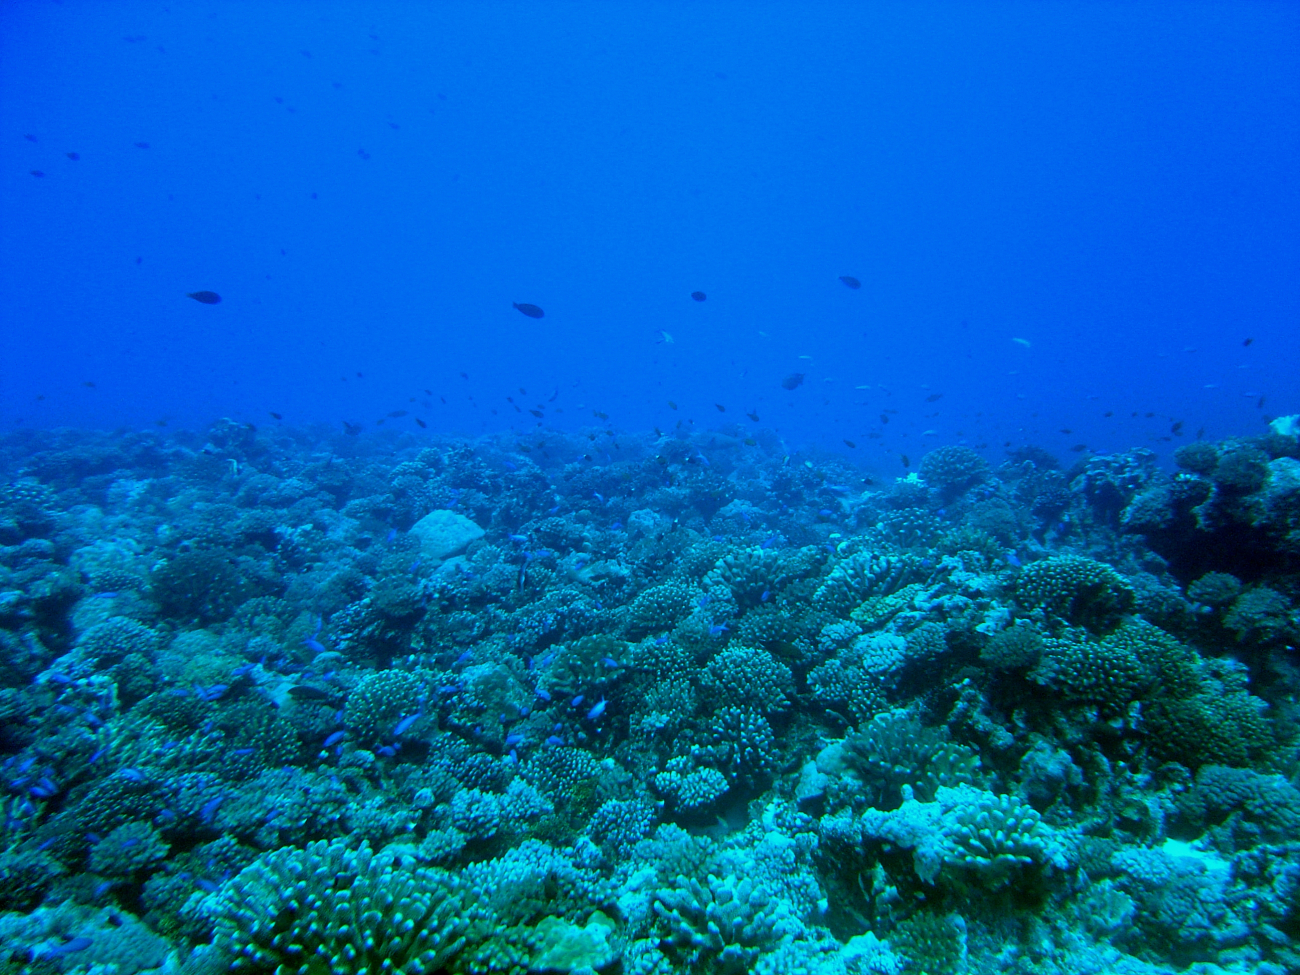 Reef scene with numerous reef fish